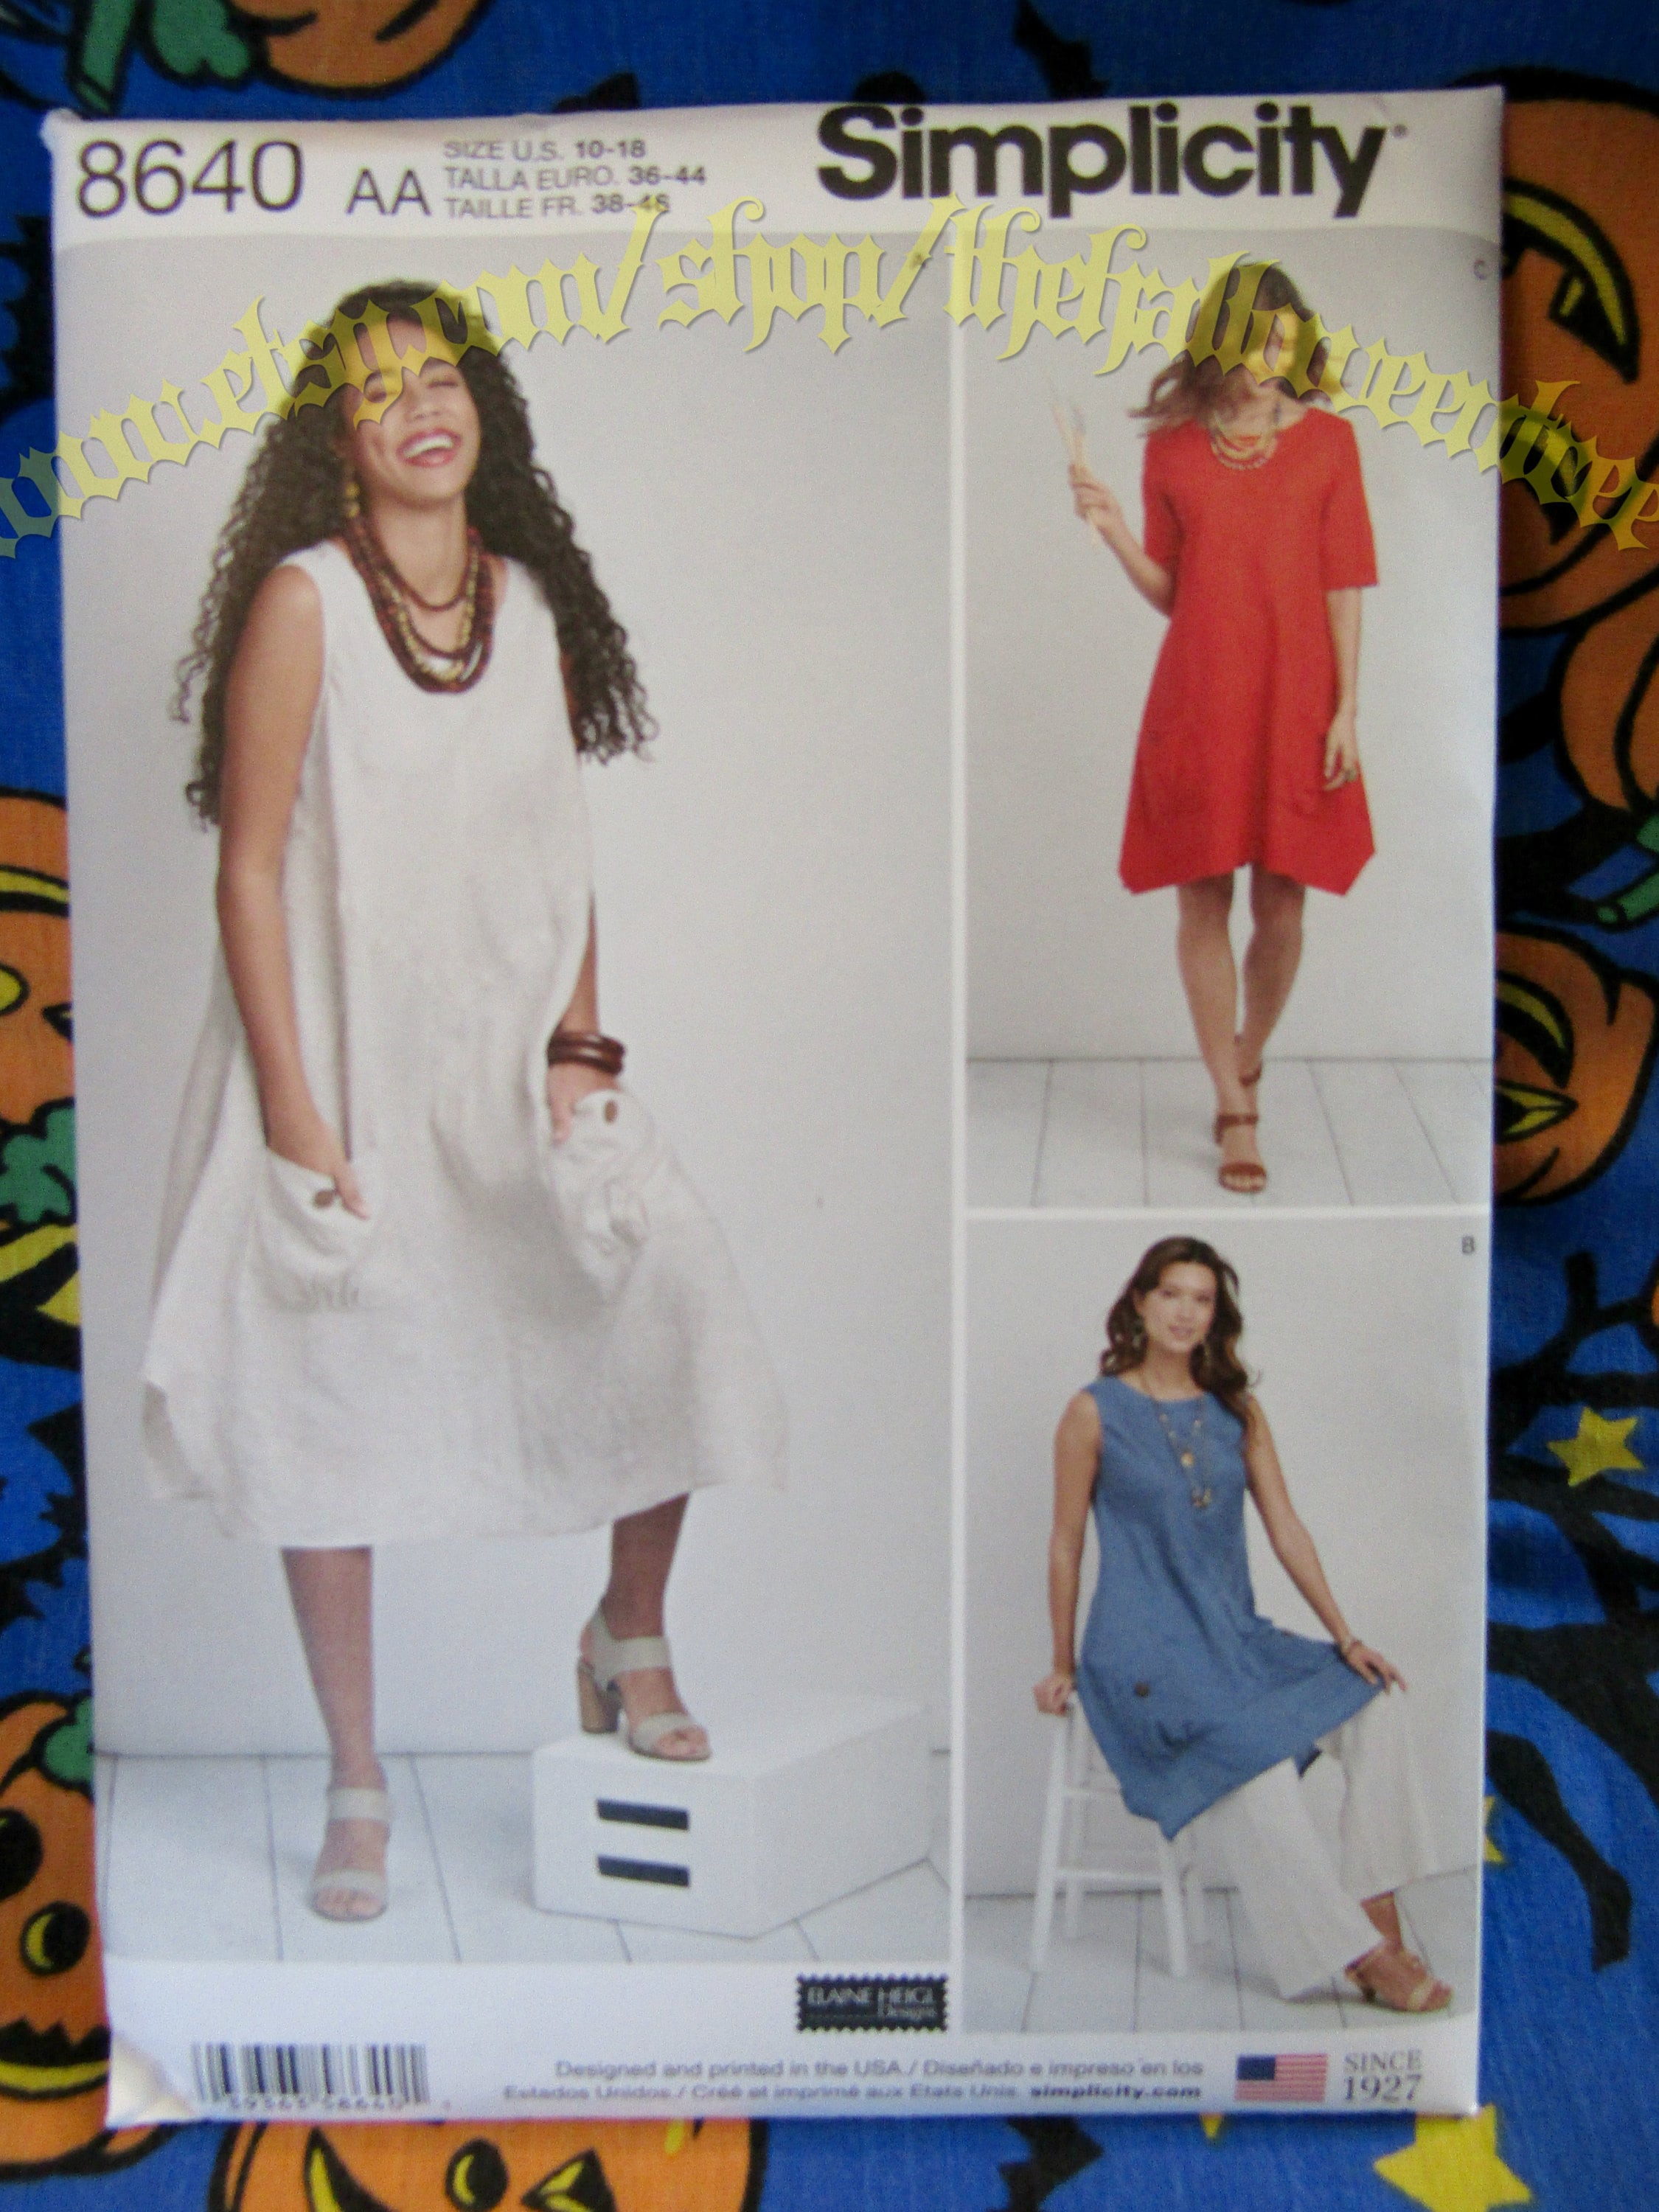 Simplicity 8640 simple lagenlook tunic house dress | Etsy